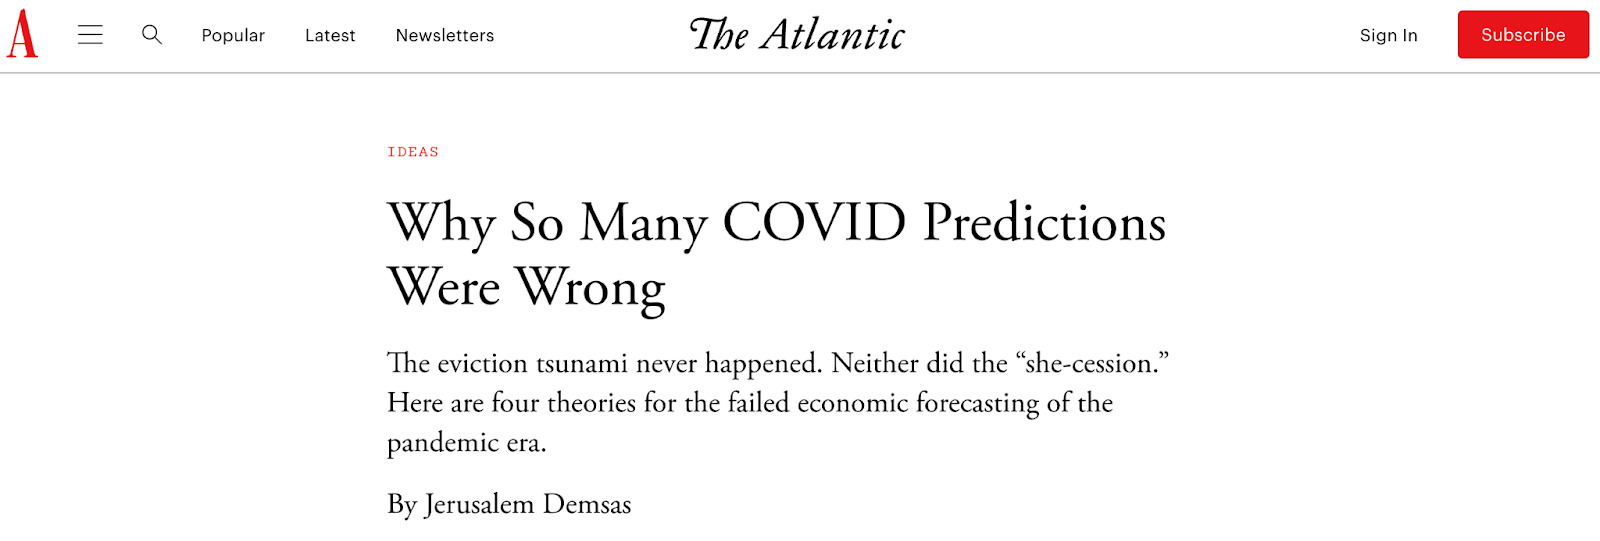 How to Use Data in Content Creation: The Atlantic showing discrepancy in data